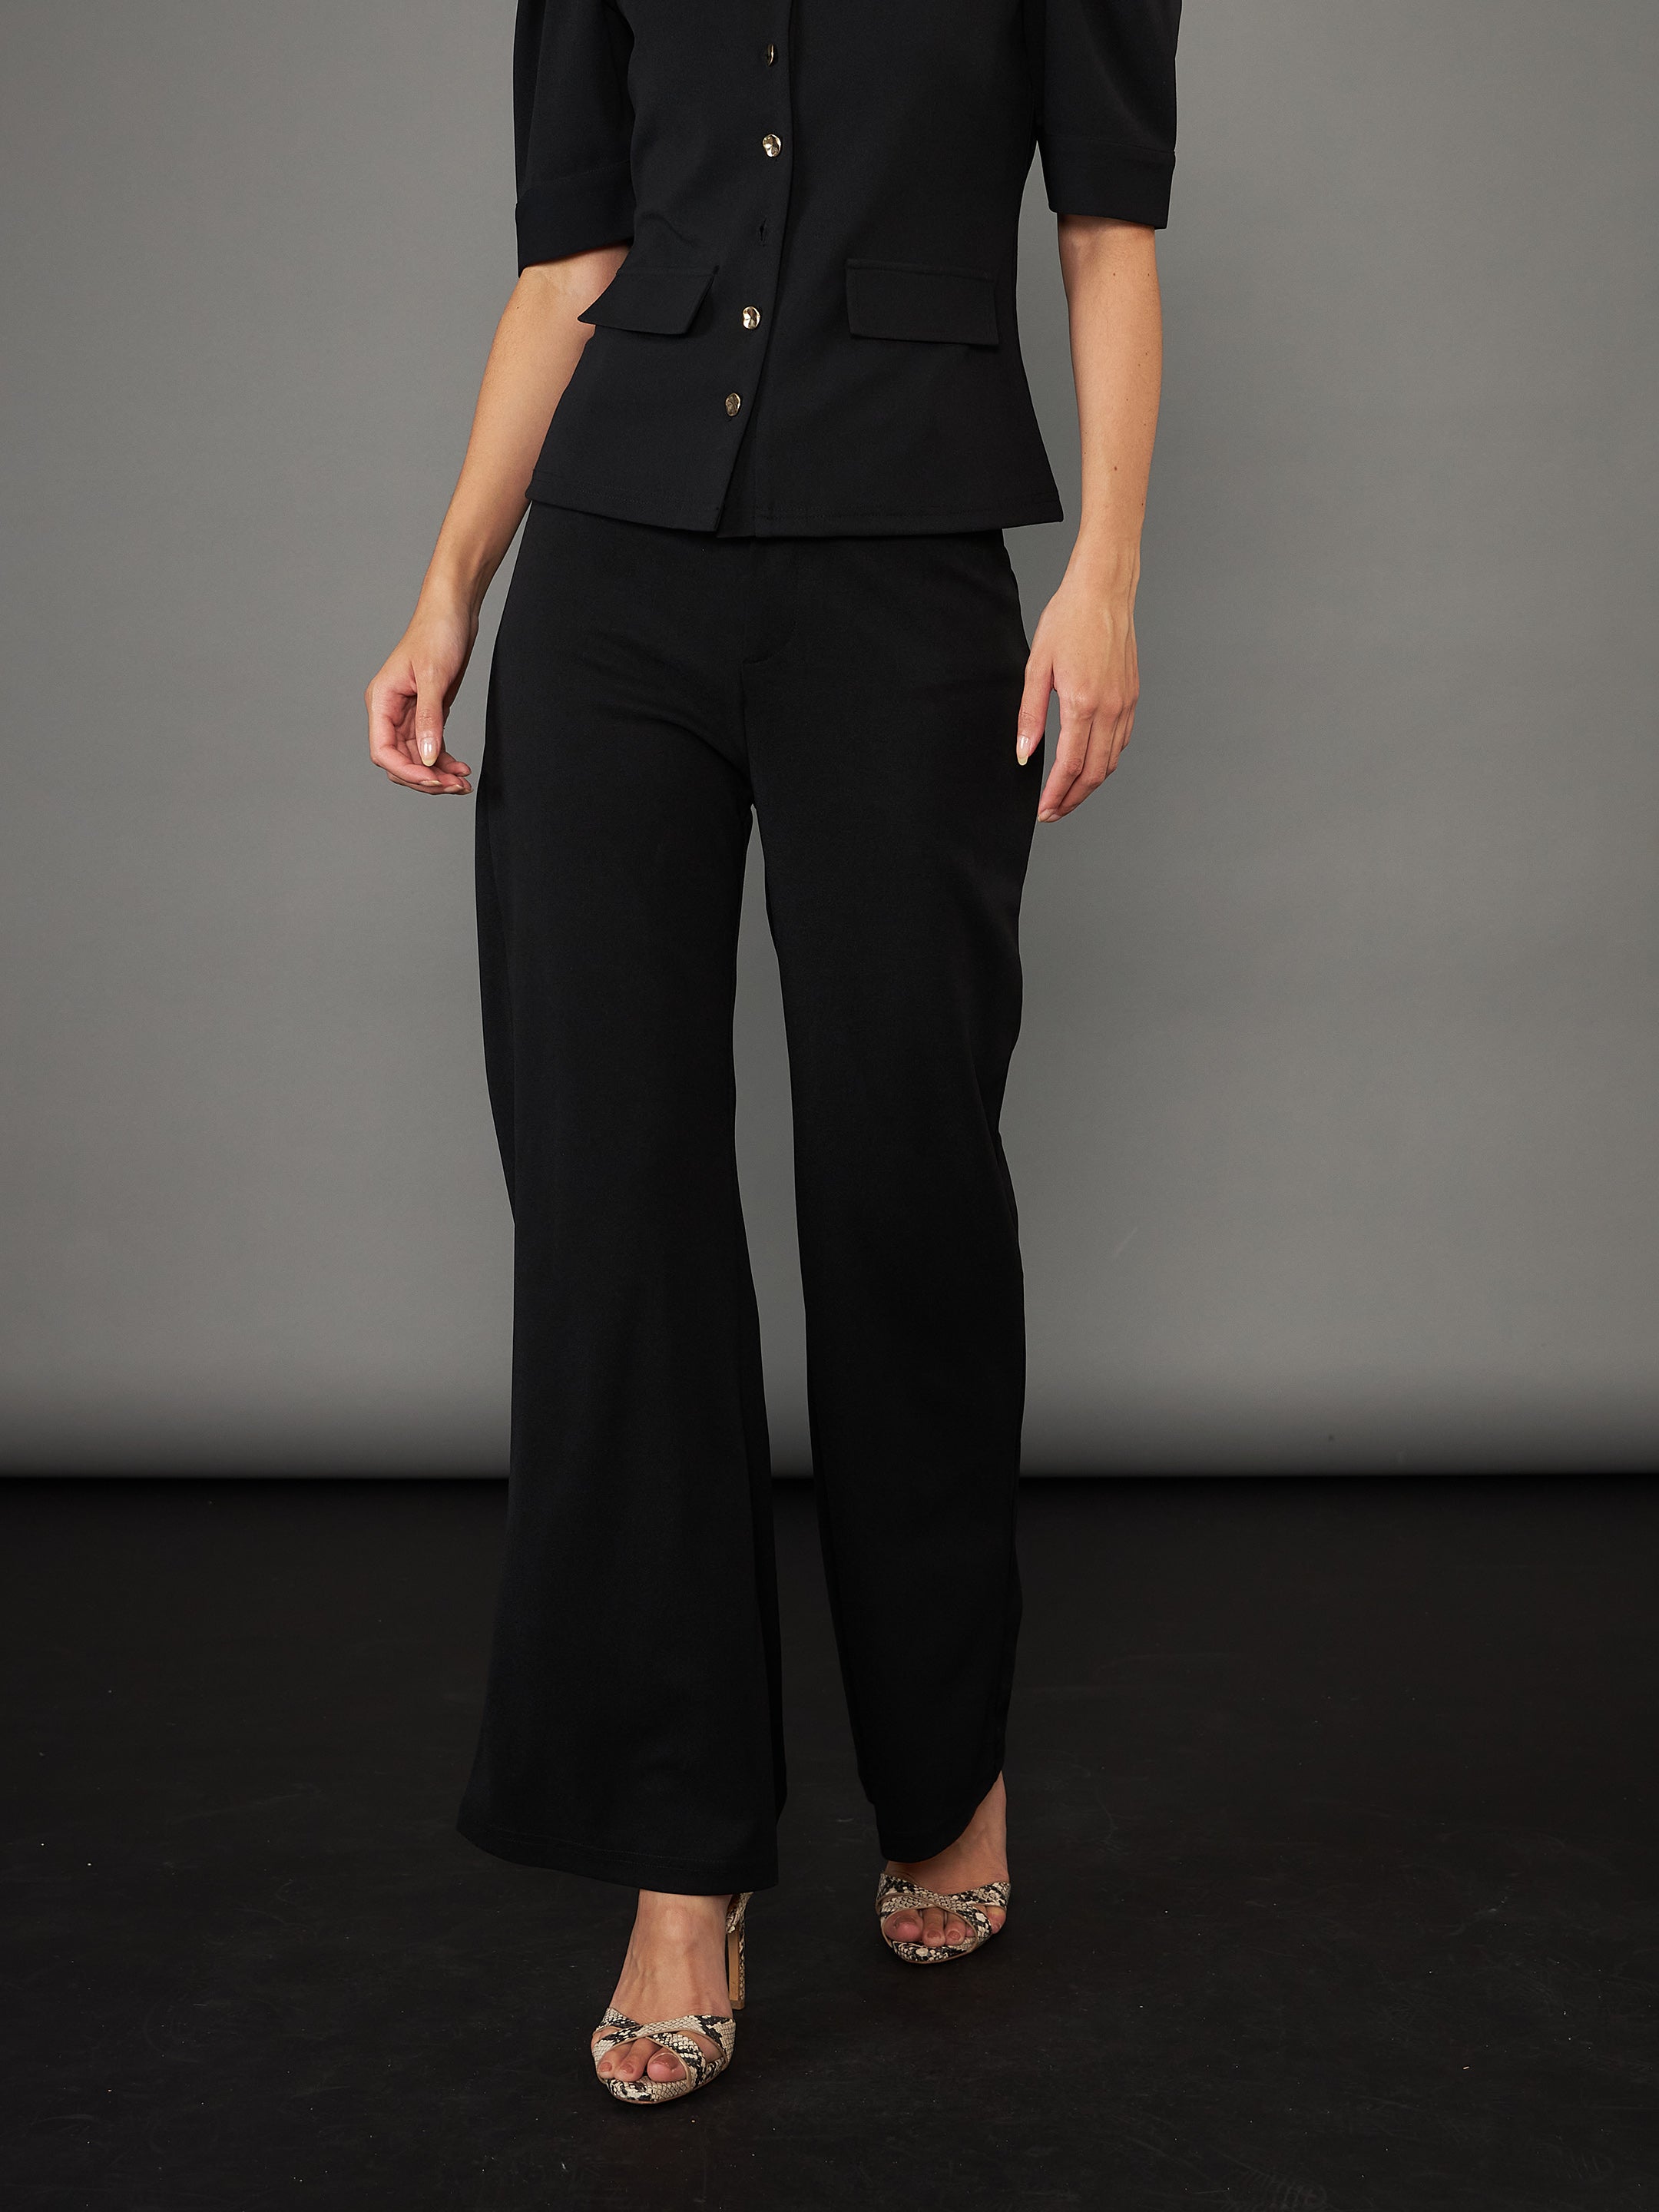 SOLID BLACK BELL BOTTOM PANTS FOR WOMEN at Rs 249 in Surat